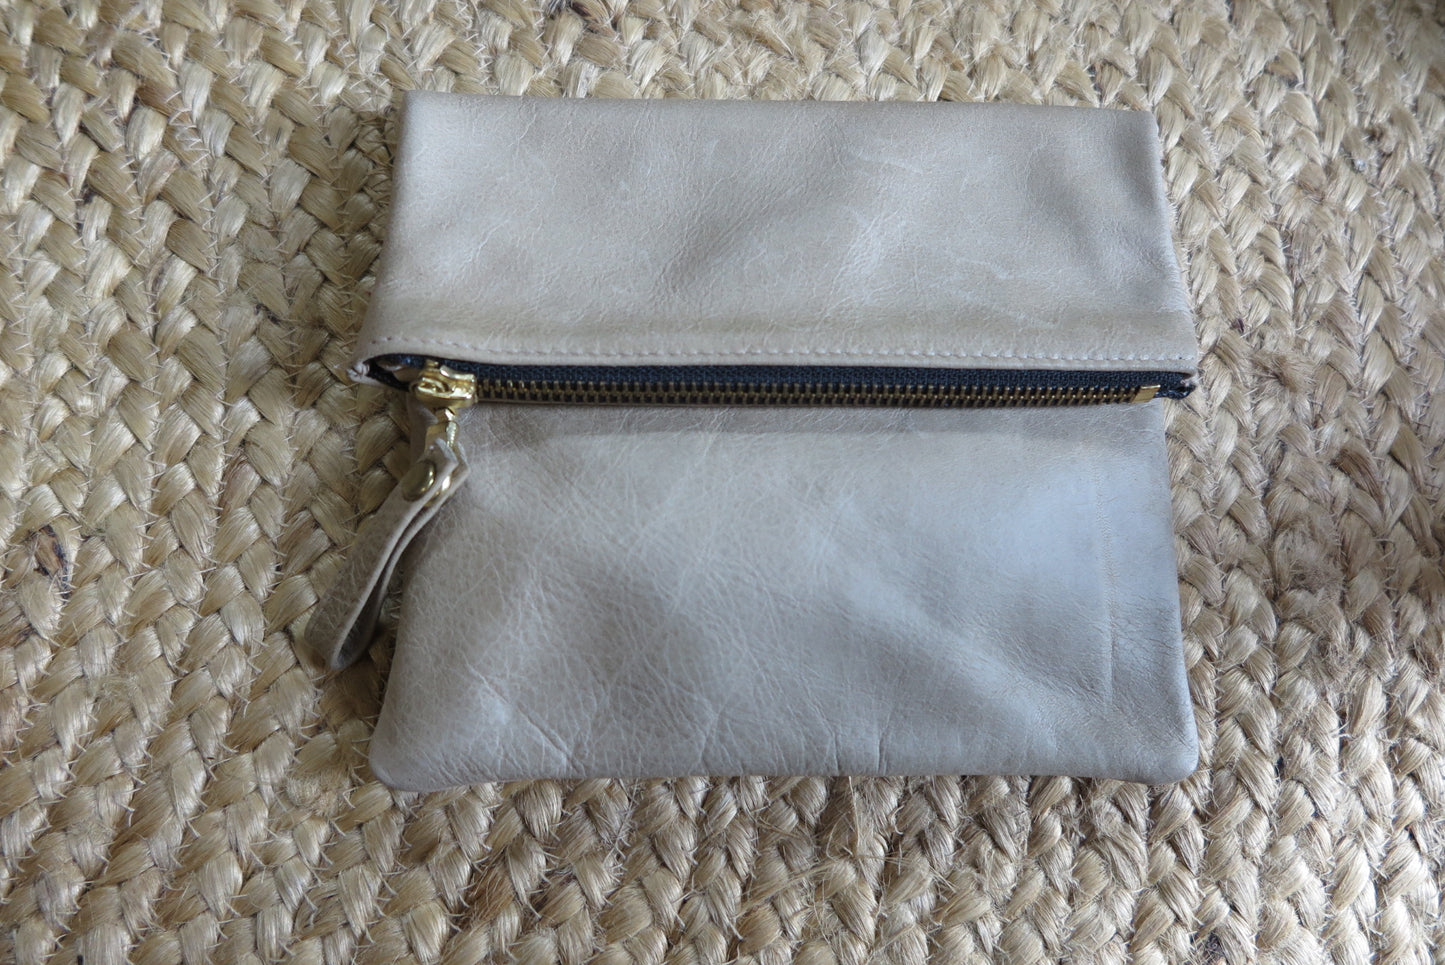 Large Dusty Olive Genuine Handmade Leather Clutch with Metallic Detailing